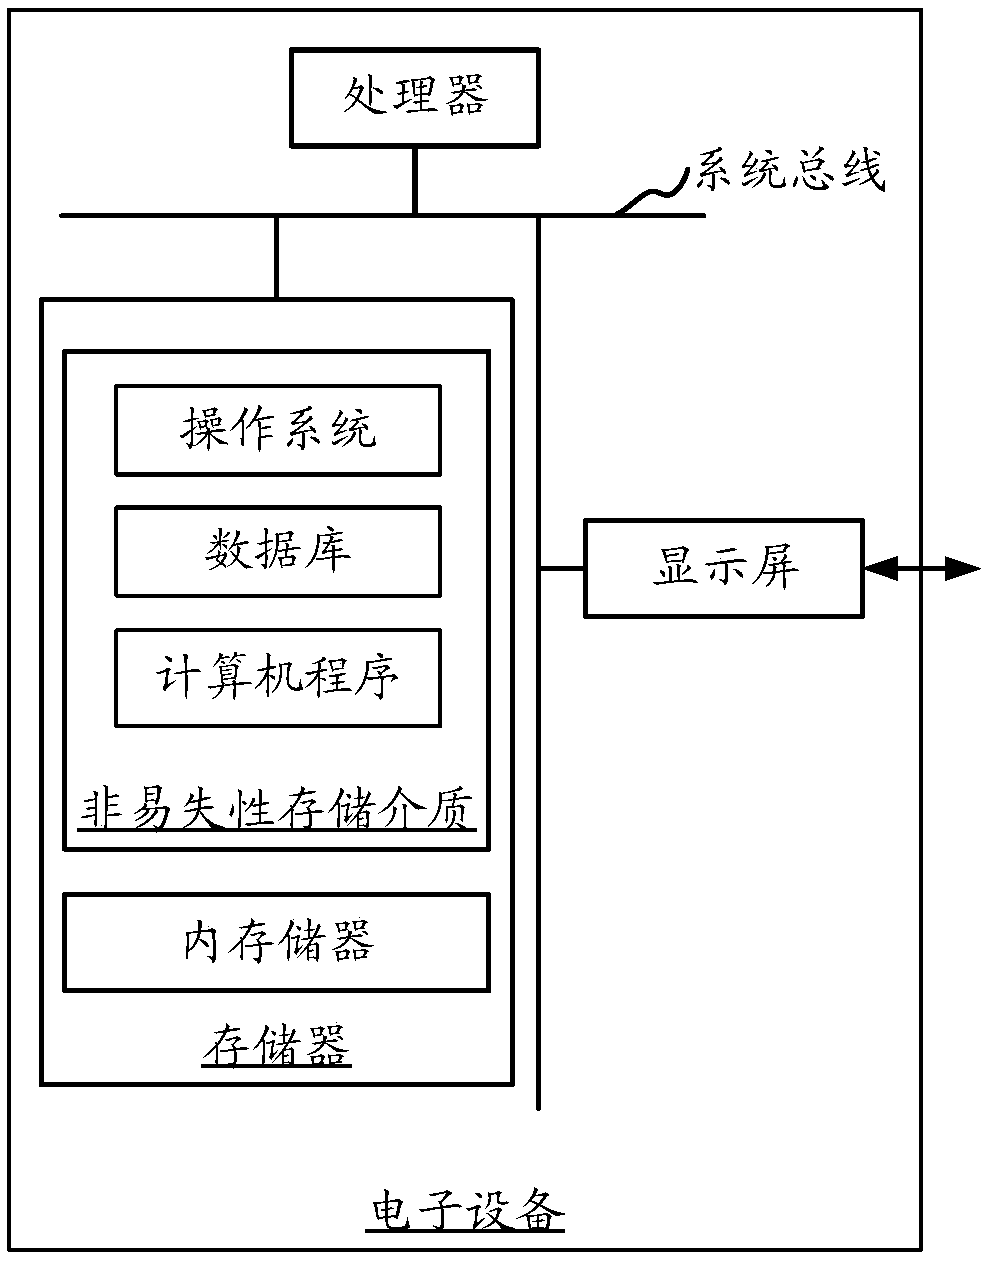 Memory processing method and device, electronic equipment and computer readable storage medium